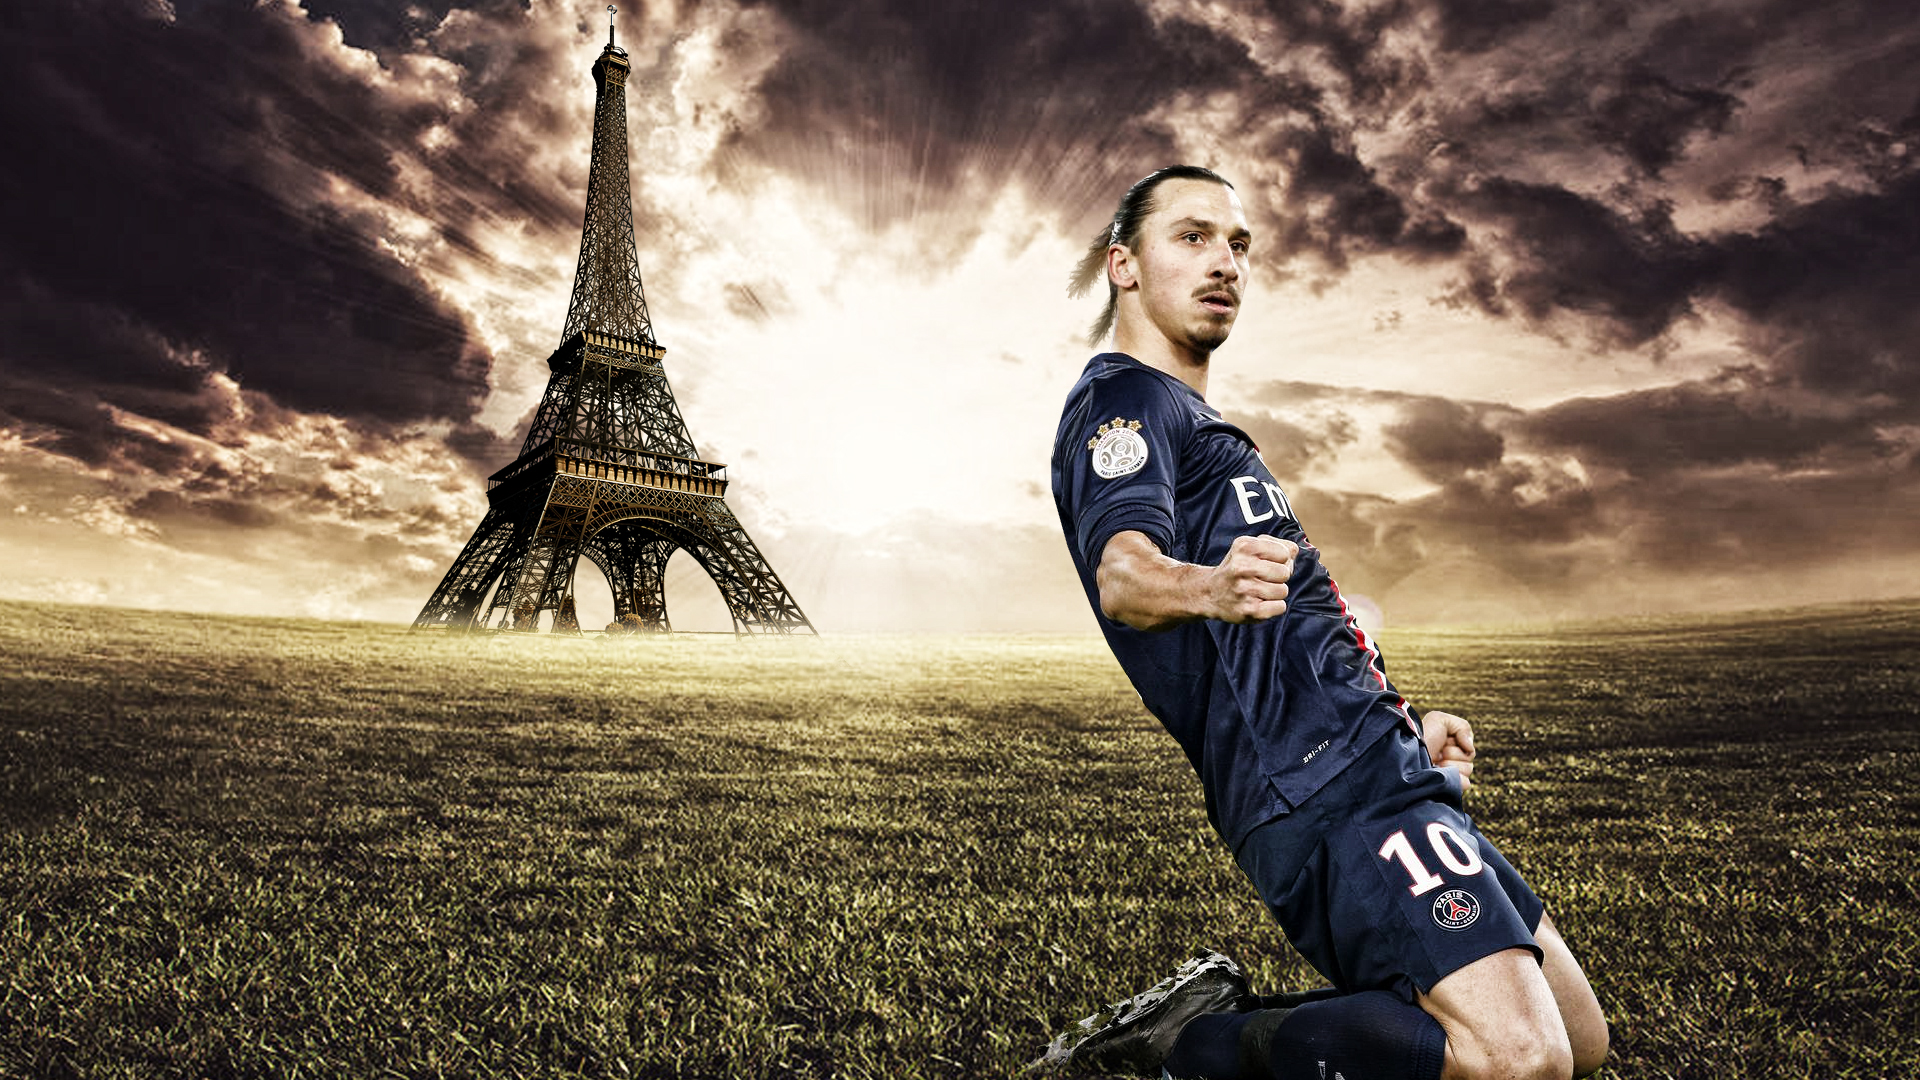 Zlatan Ibrahimovic Wallpapers, Pictures, Images